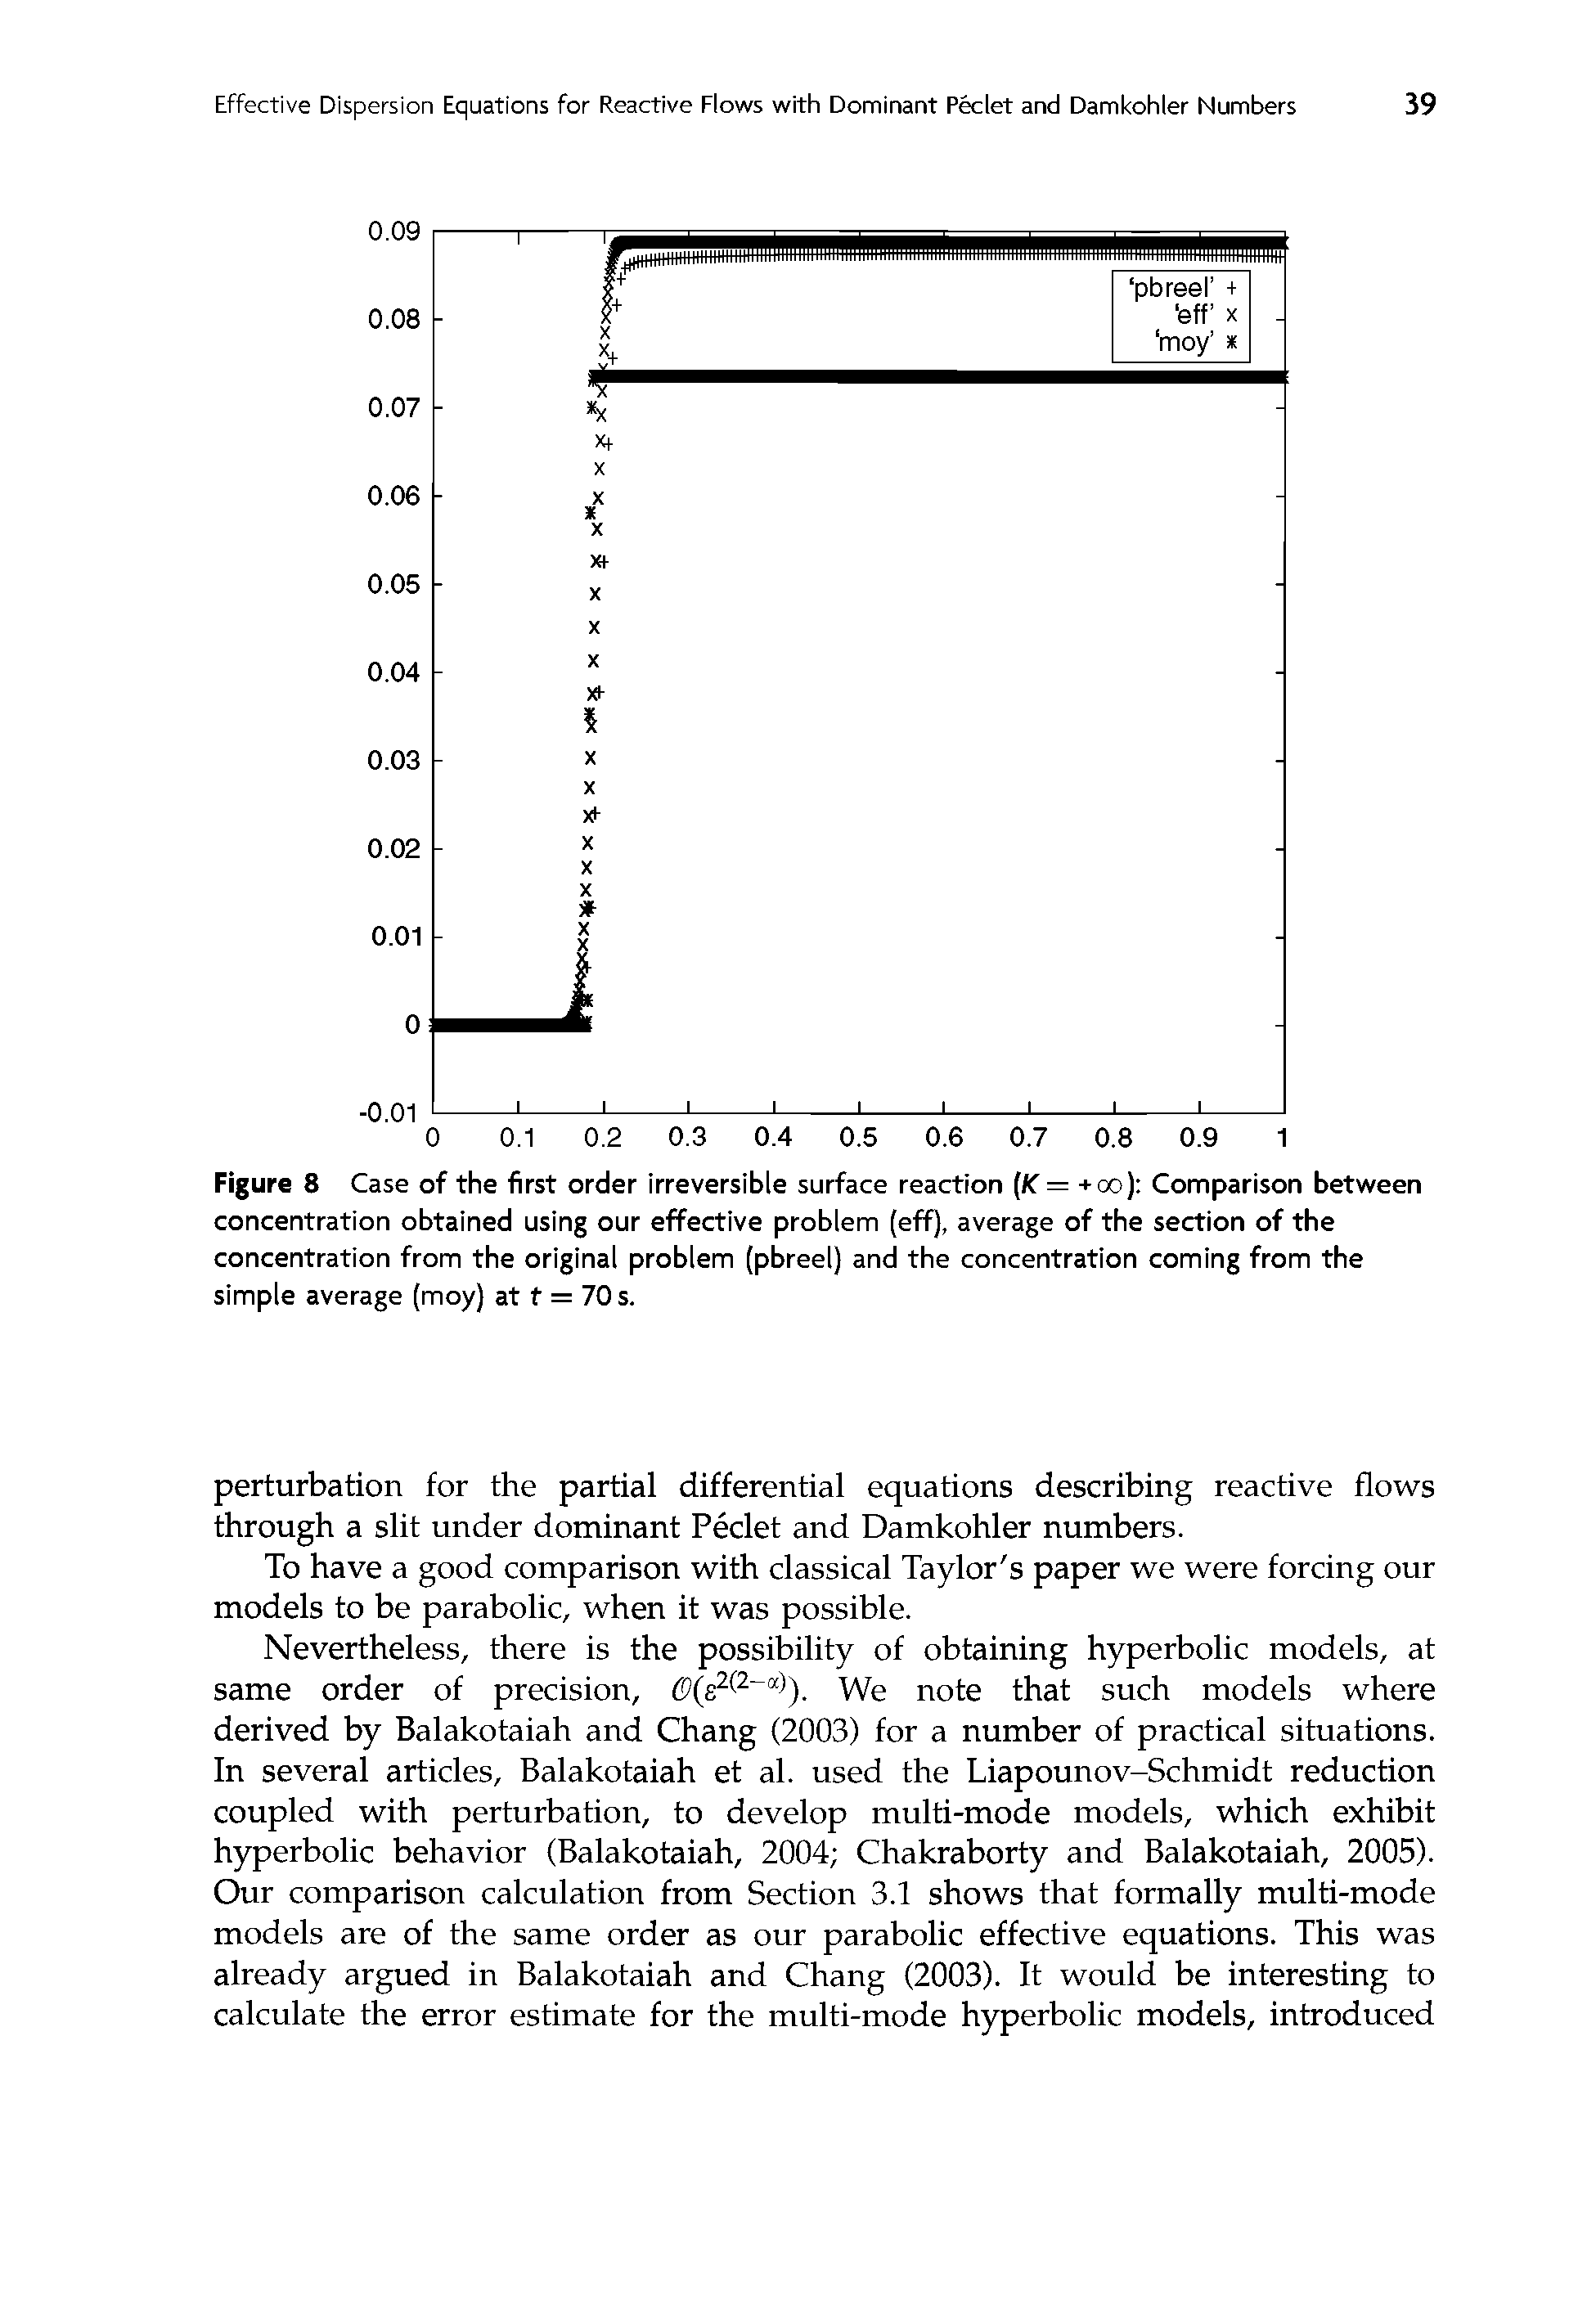 Figure 8 Case of the first order irreversible surface reaction K — +oo) Comparison between concentration obtained using our effective problem (eff), average of the section of the concentration from the original problem (pbreel) and the concentration coming from the simple average (moy) at t = 70s.